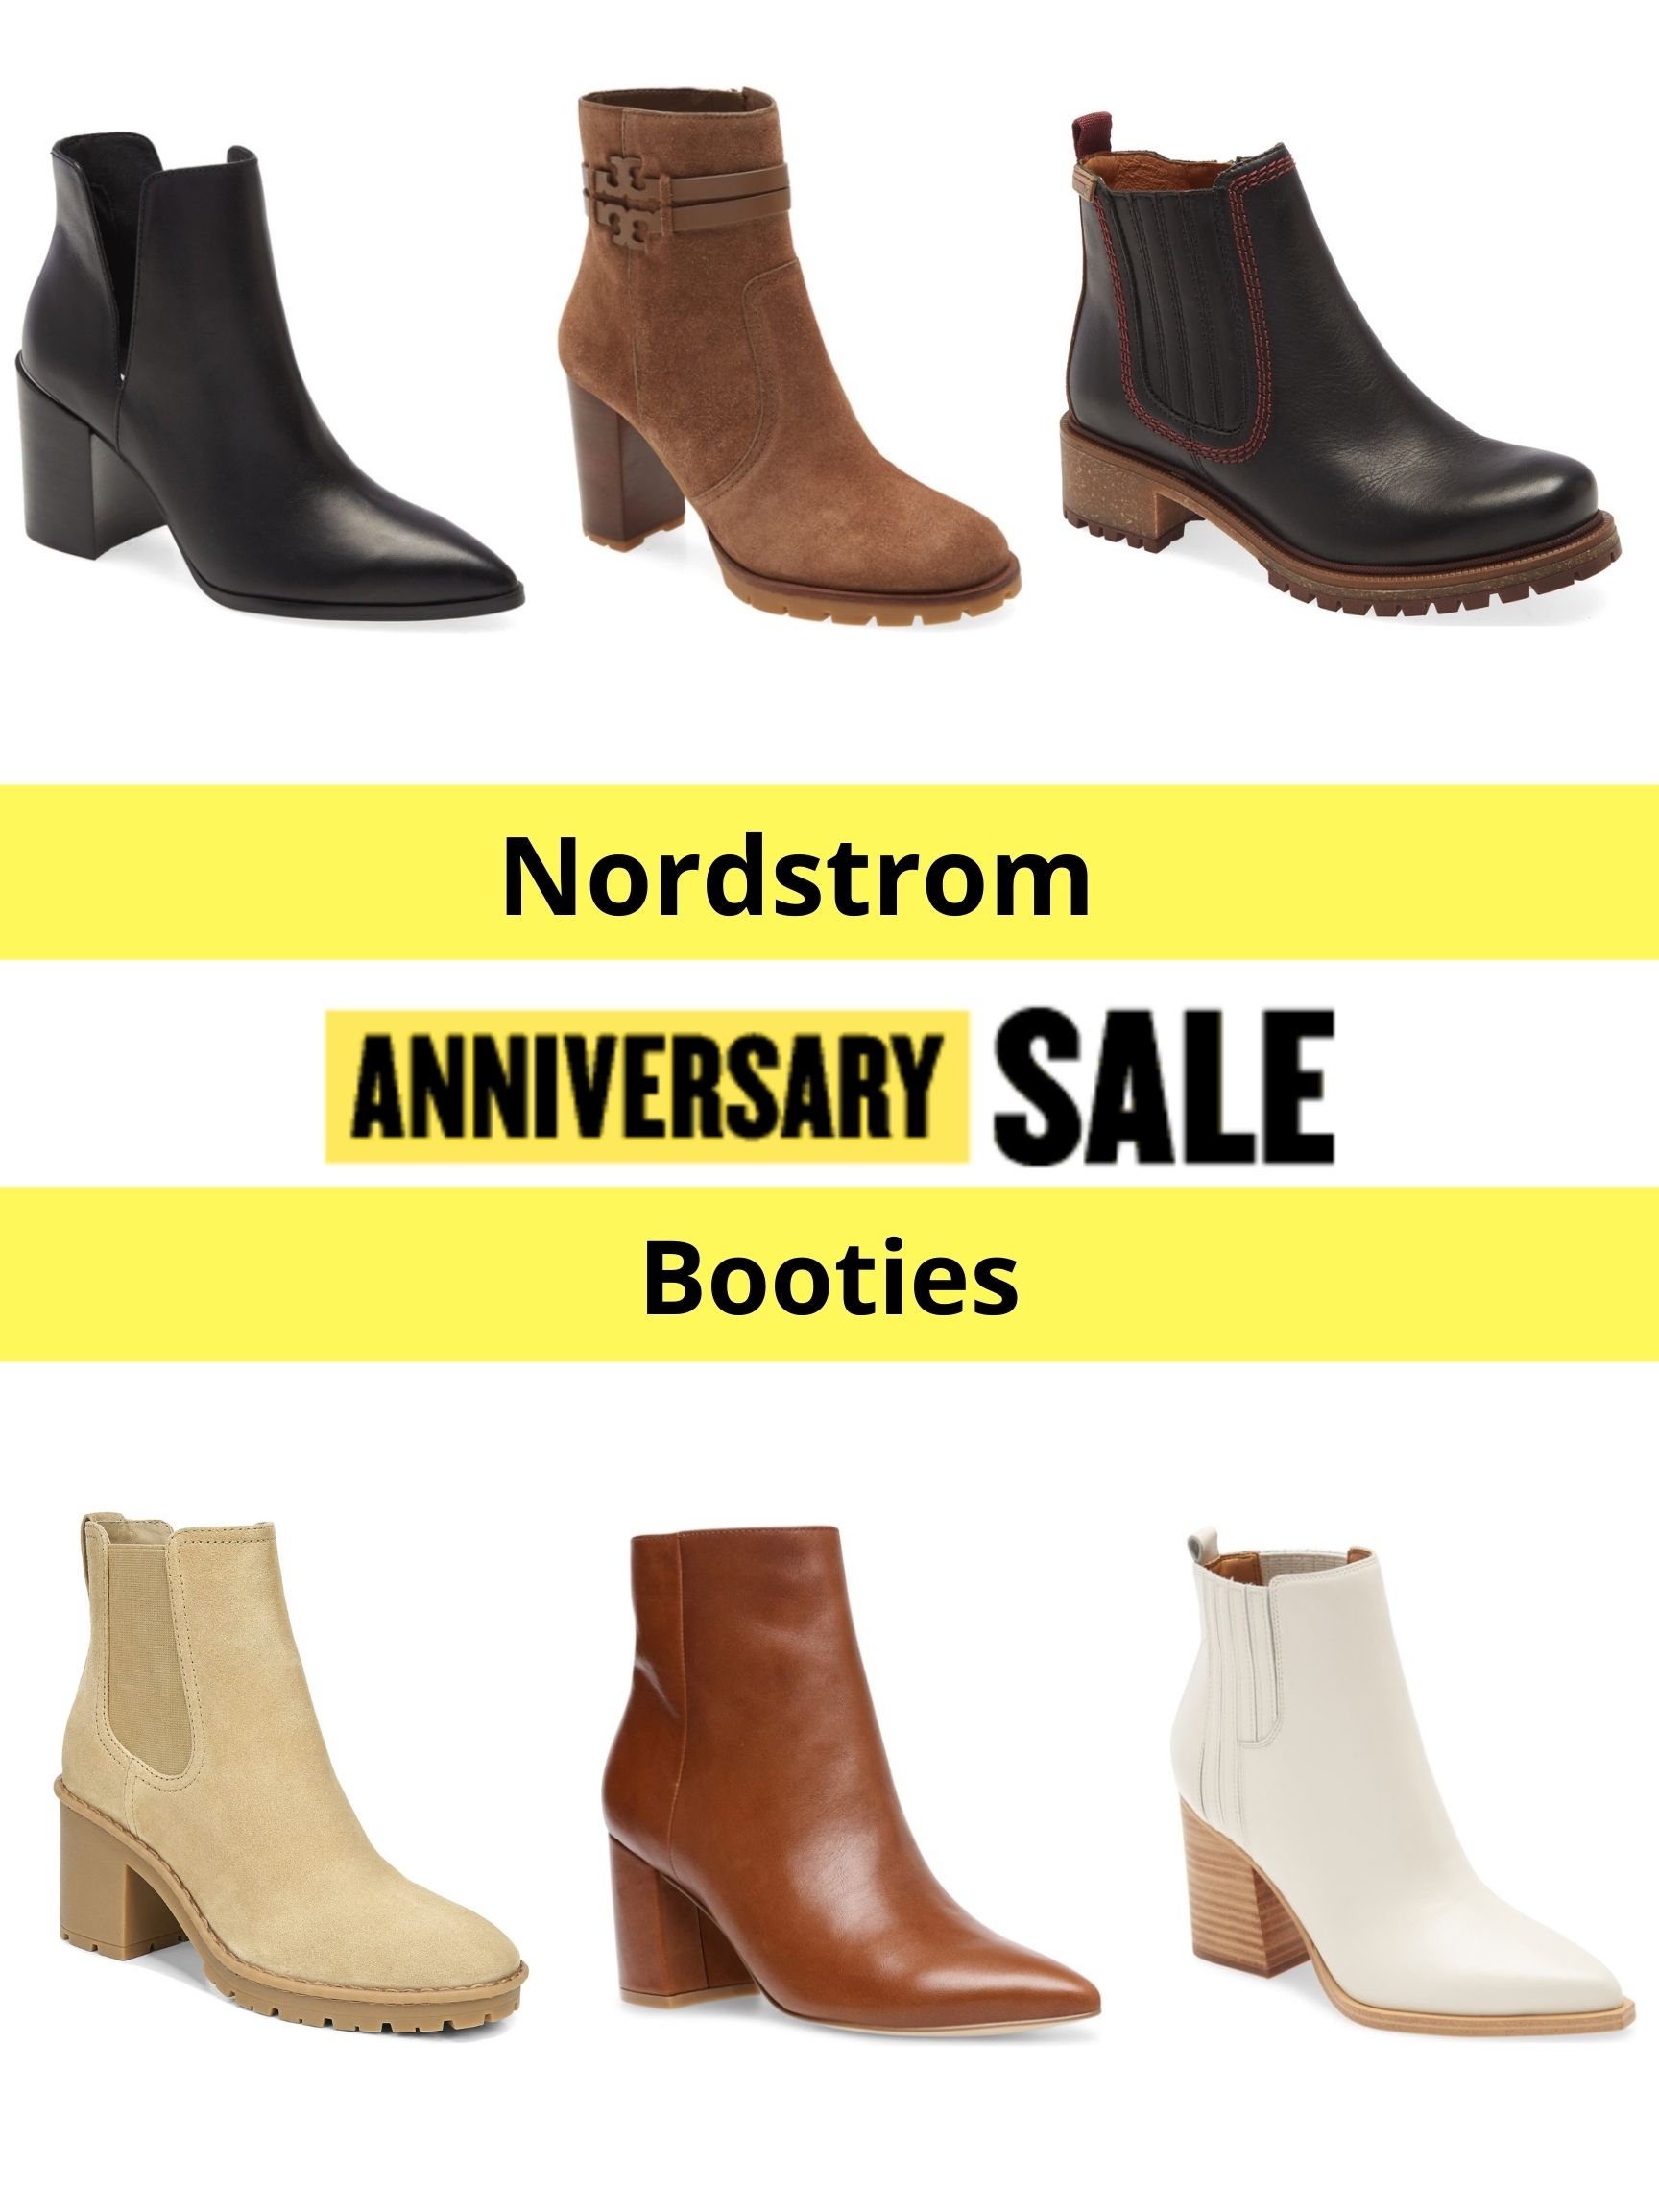 The 2020 Nordstrom Anniversary Sale is happening and this year the plus size items in the sale are on trend and ready to take you into the fall.